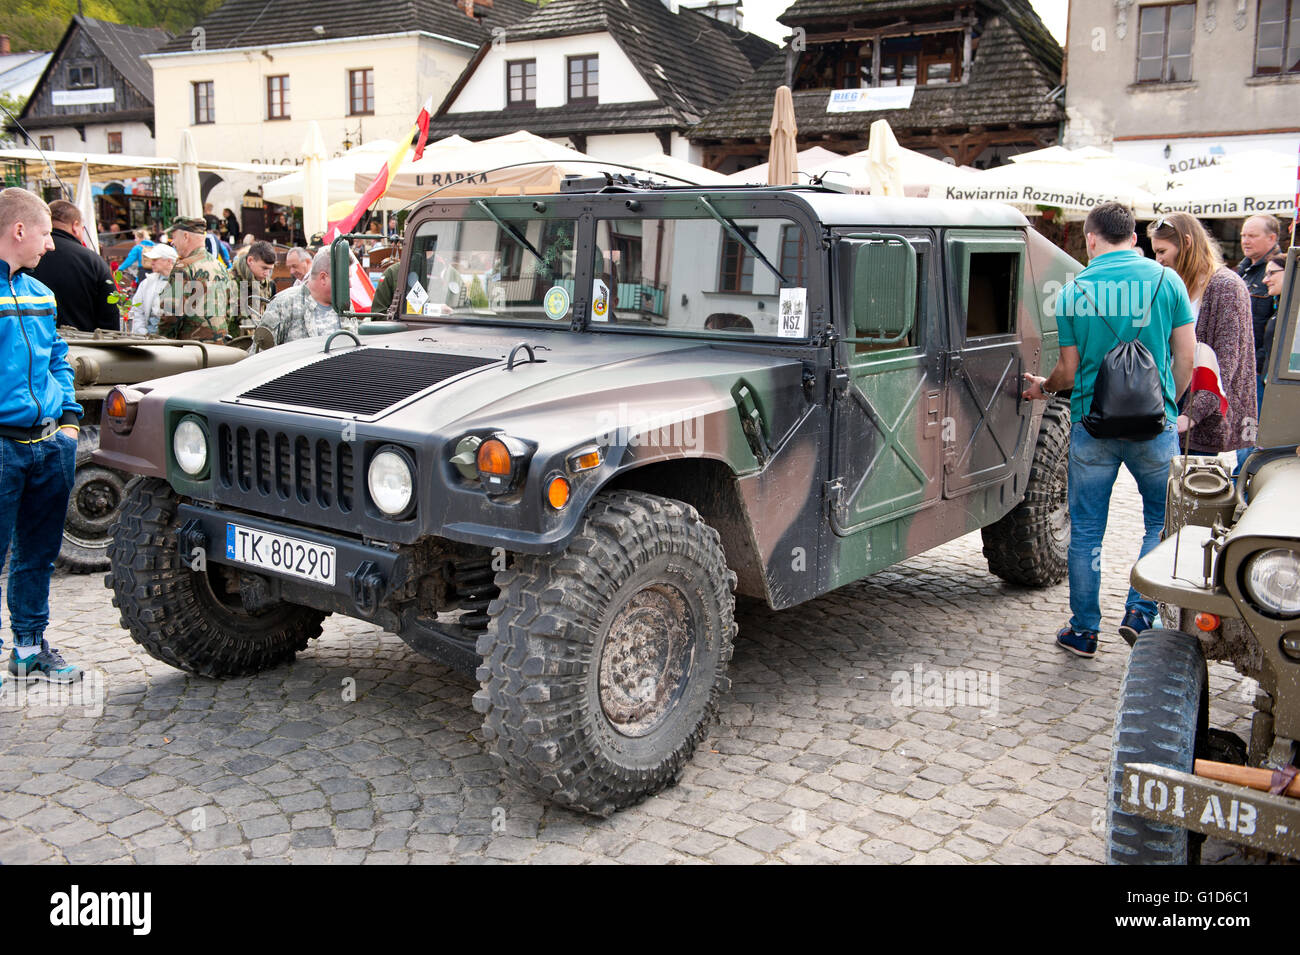 Willys at Rally VI military vehicles from World War II in Kazimierz Dolny, antique army cars event at the Market square, Poland. Stock Photo